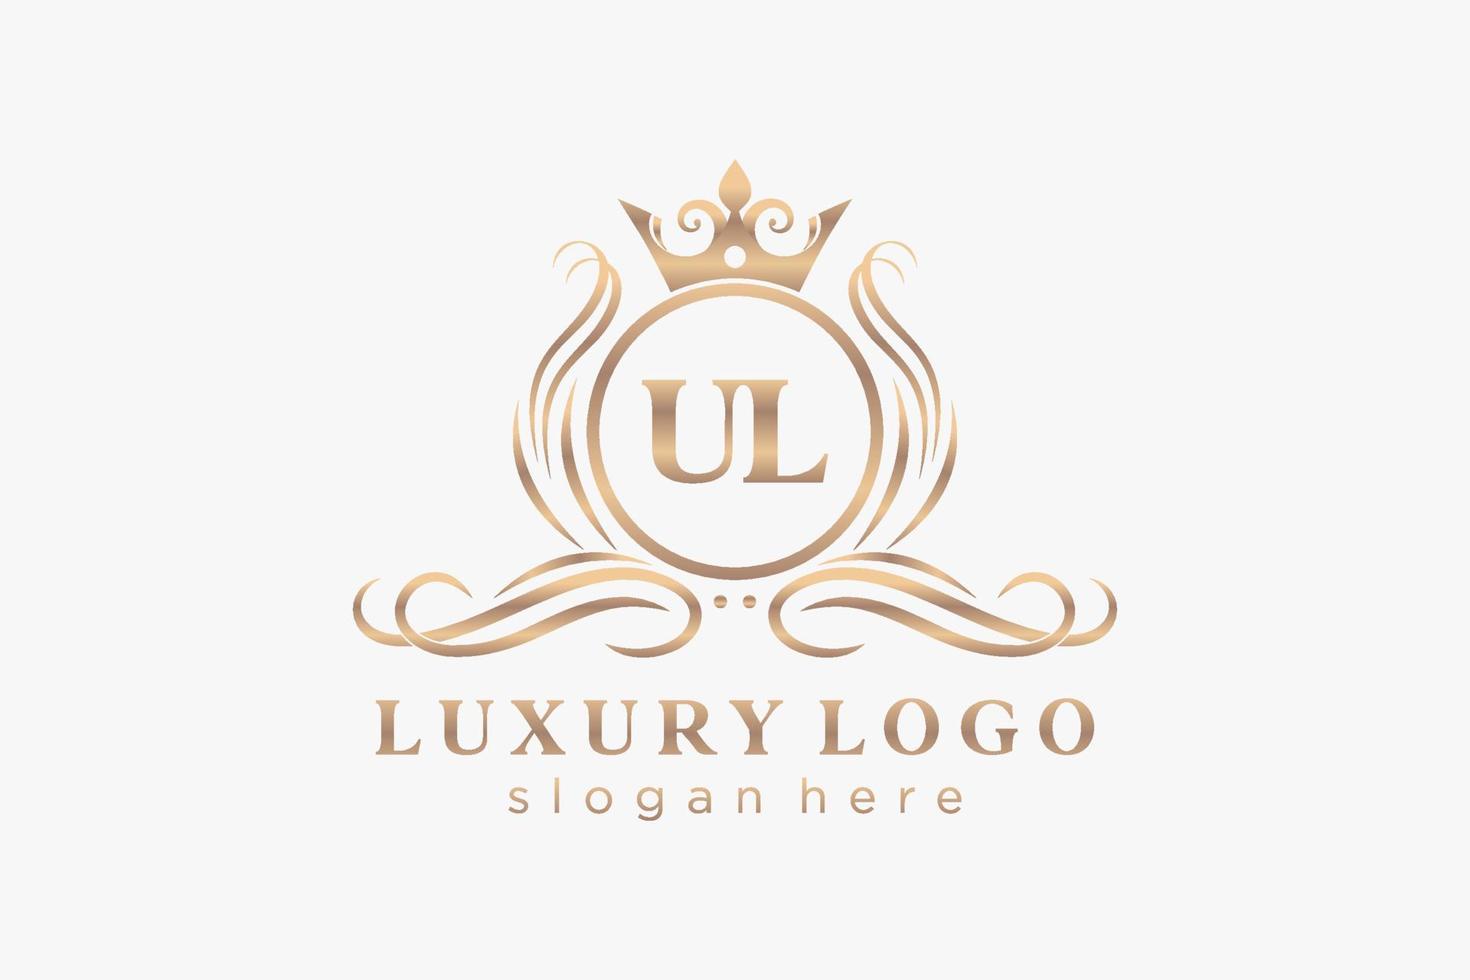 Initial UL Letter Royal Luxury Logo template in vector art for Restaurant, Royalty, Boutique, Cafe, Hotel, Heraldic, Jewelry, Fashion and other vector illustration.